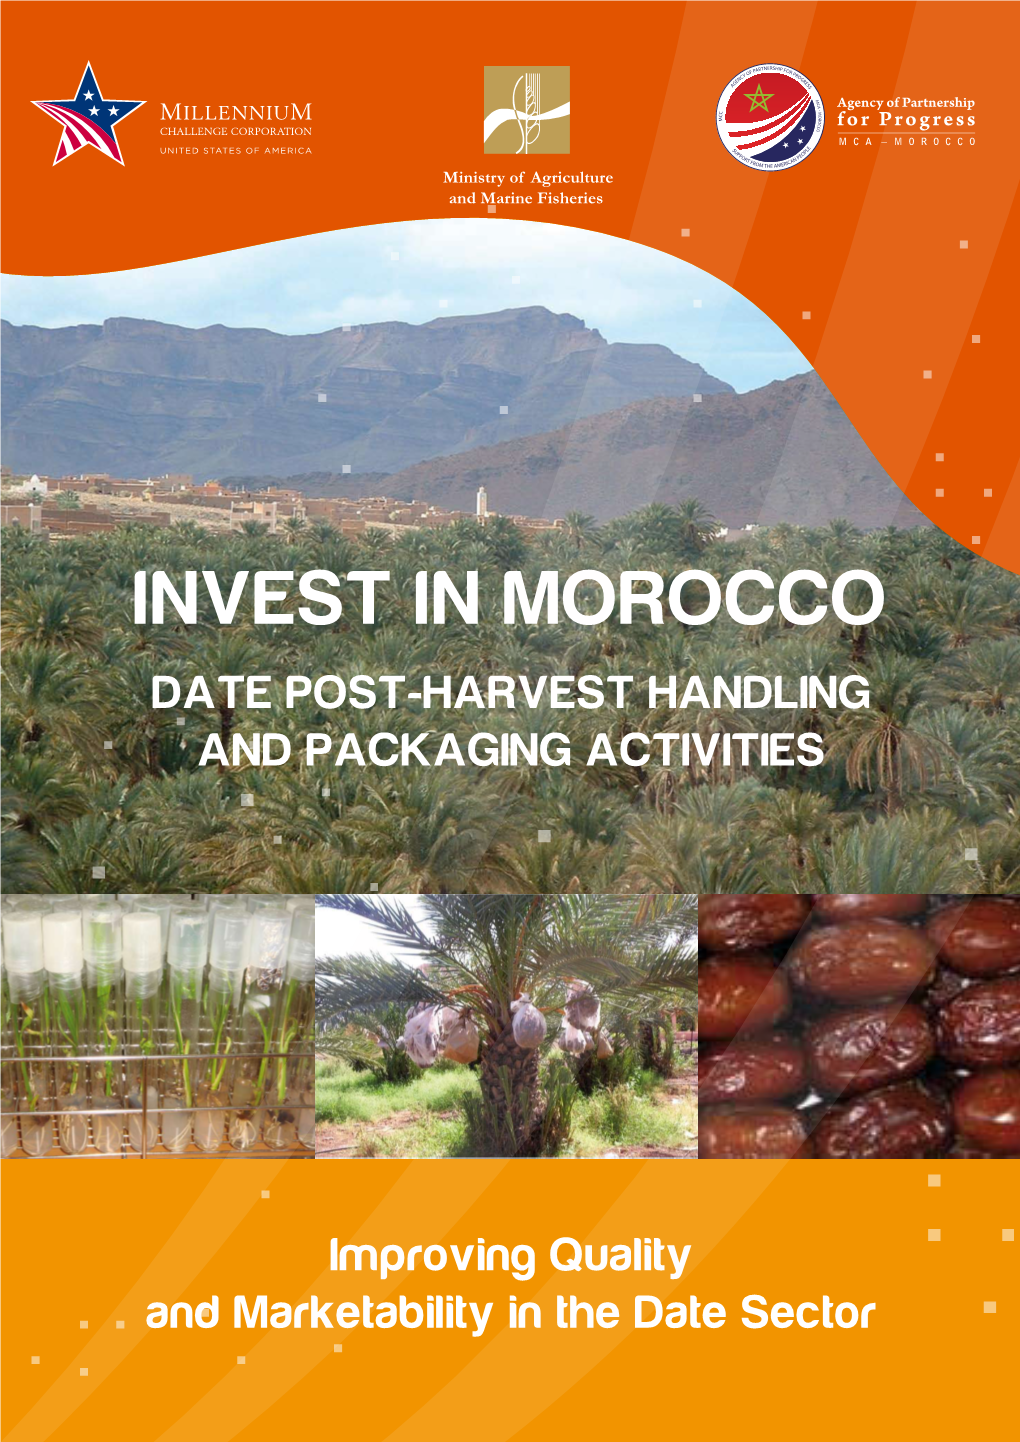 Invest in Morocco Date Post-Harvest Handling and Packaging Activities